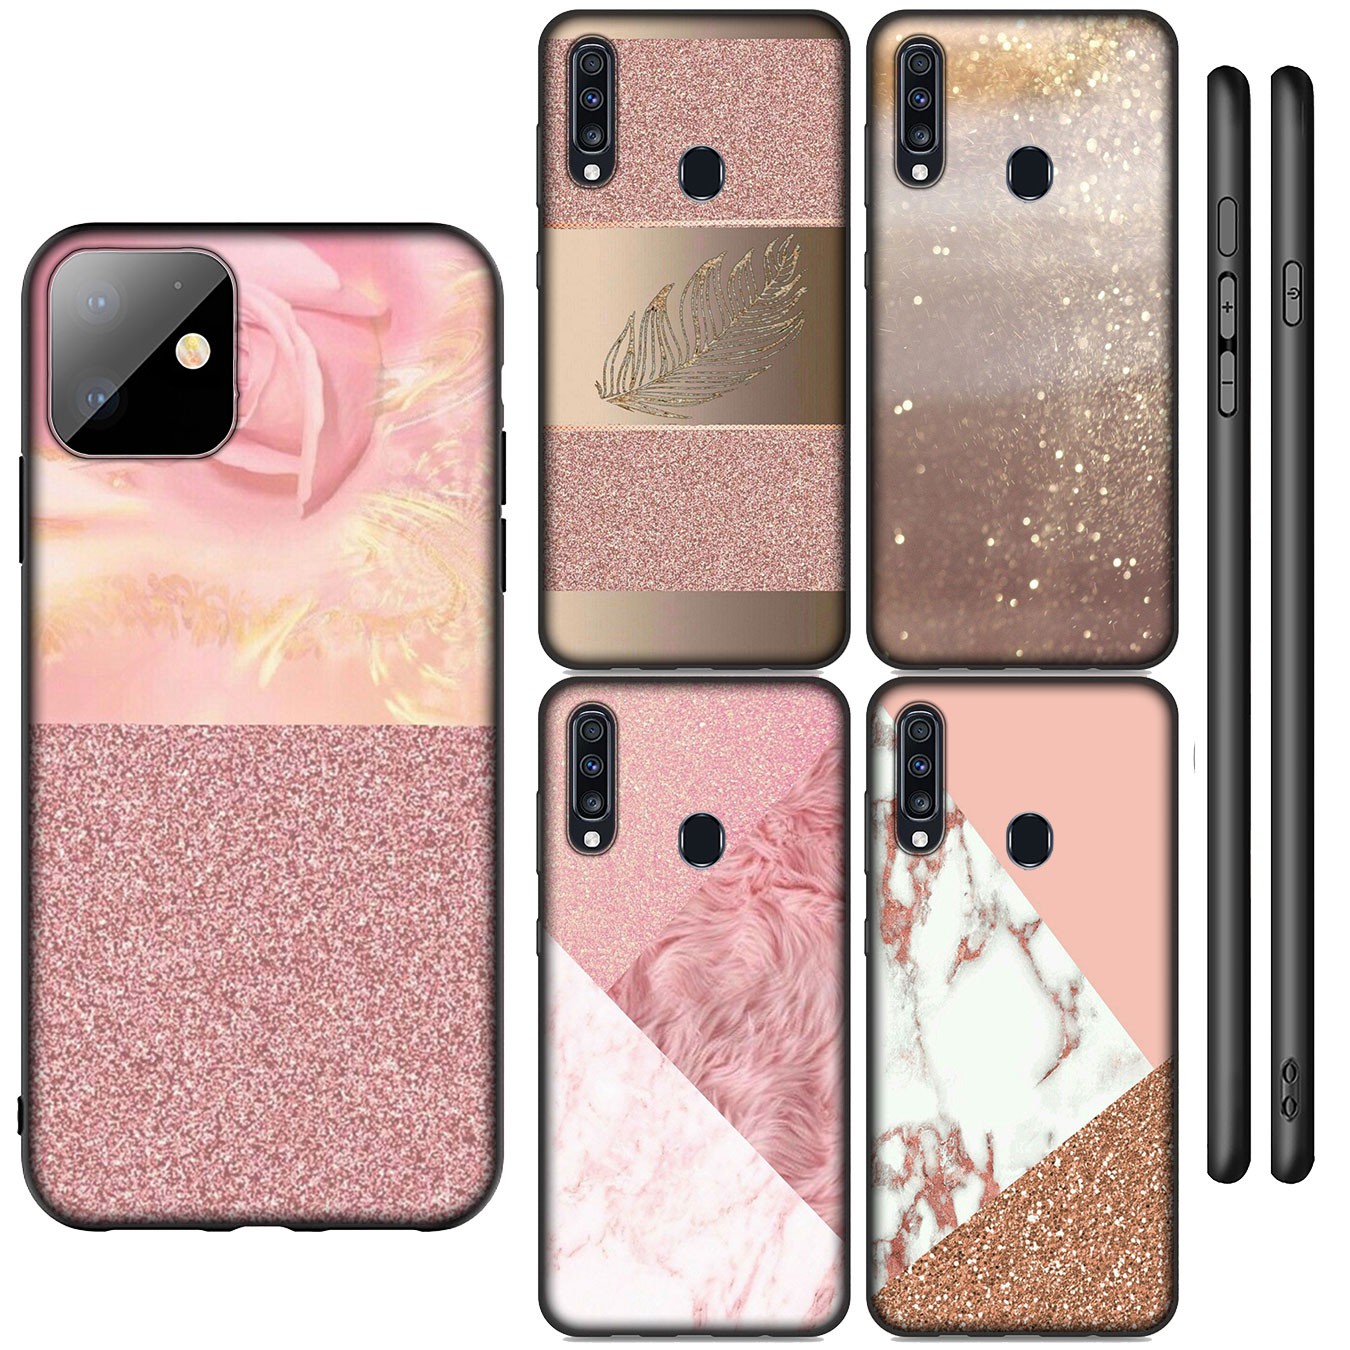 Samsung Galaxy A02S J2 J4 J5 J6 Plus J7 Prime A02 M02 j6+ A42 + Casing Soft Silicone Marble Gold Pink rose Glitter Dust Phone Case